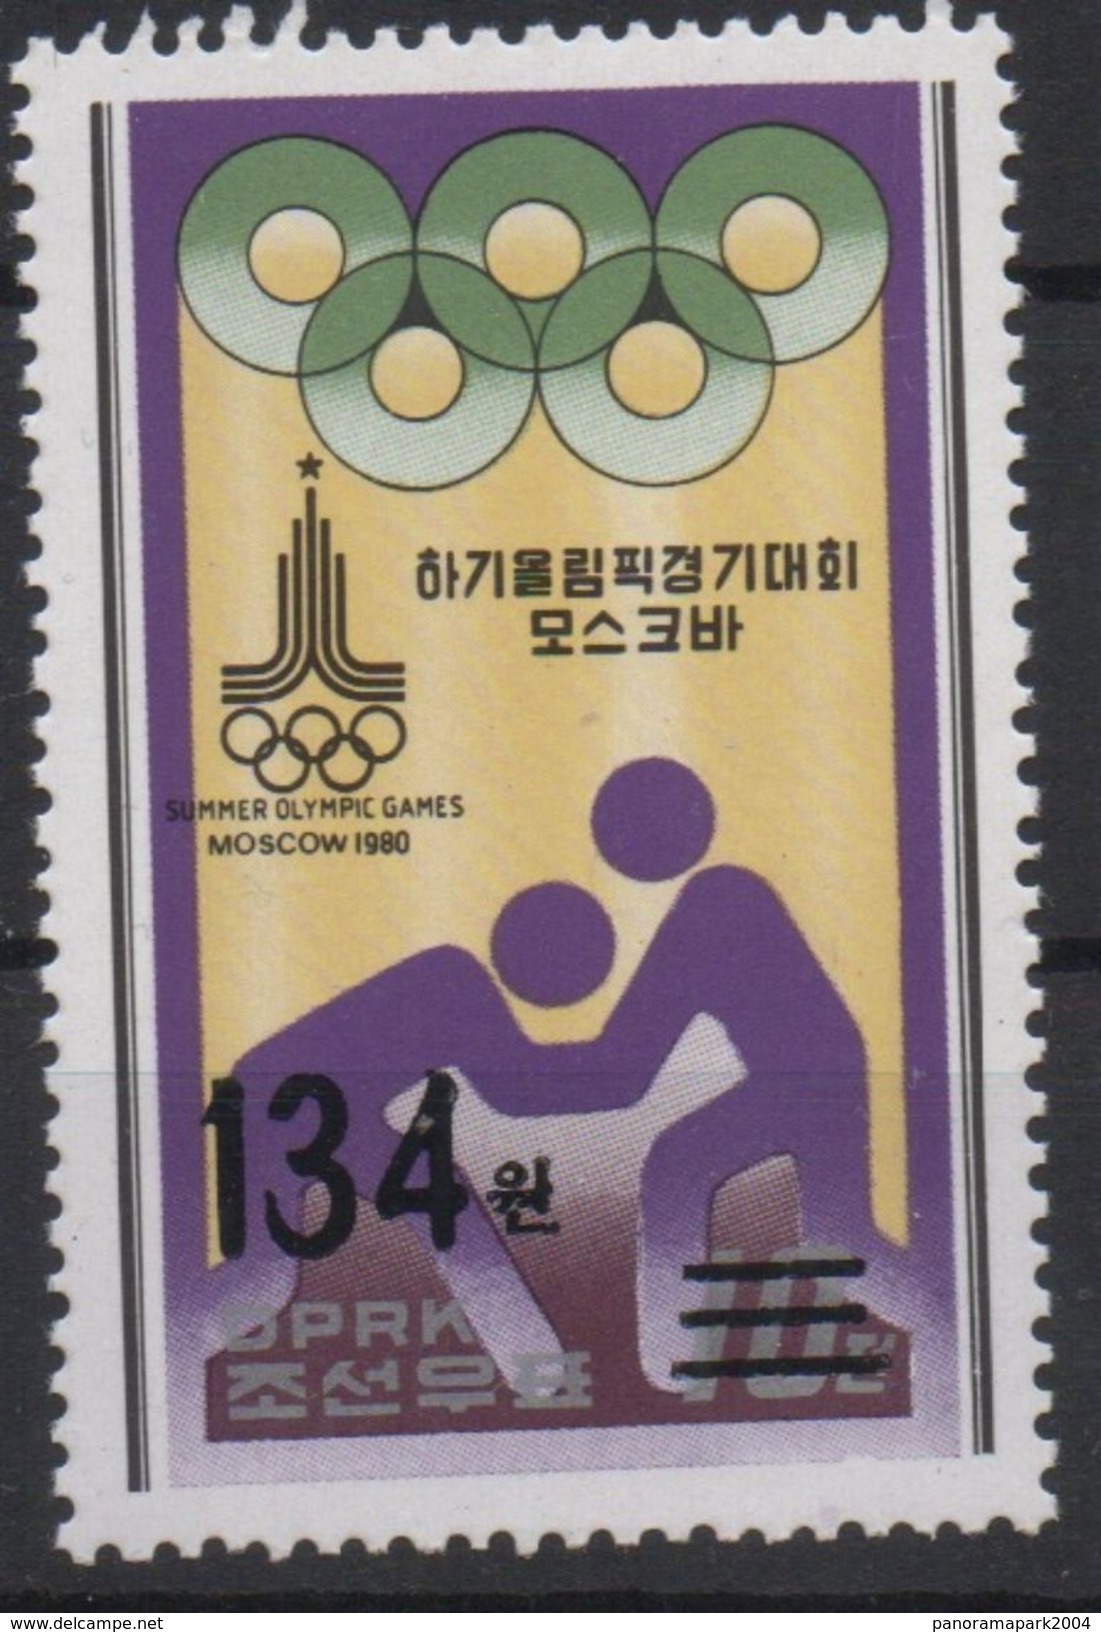 North Korea Corée Du Nord 2006 Mi. 5112 OVERPRINT Olympic Games Jeux Olympiques MOSCOW MOSCOU 1980 MOSKAU Olympia - Estate 1980: Mosca